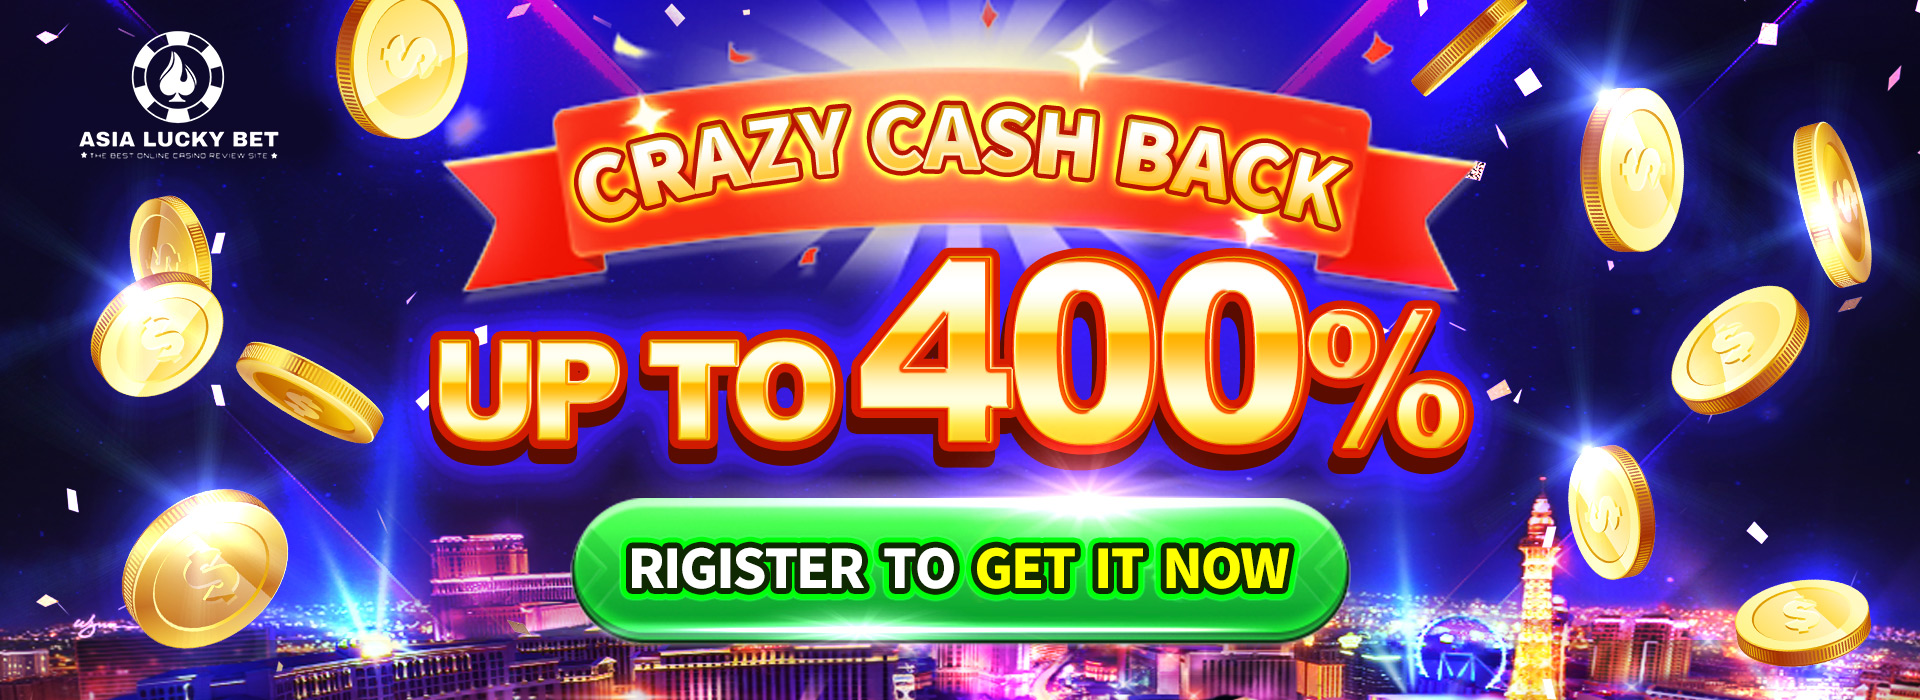 Crazy Cash back up to 400% Rigister to get it now